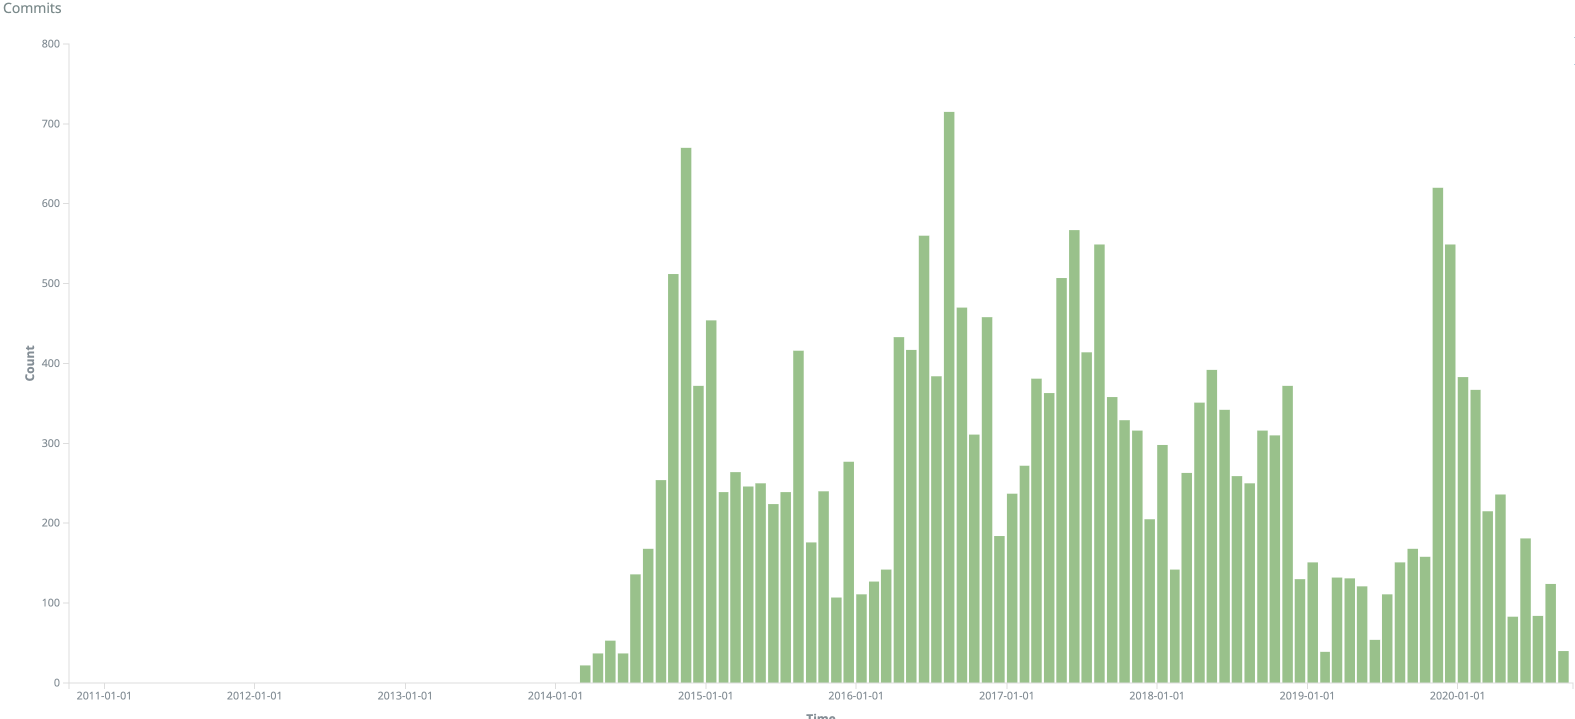 Chart showing commits over time for the Mautic repository